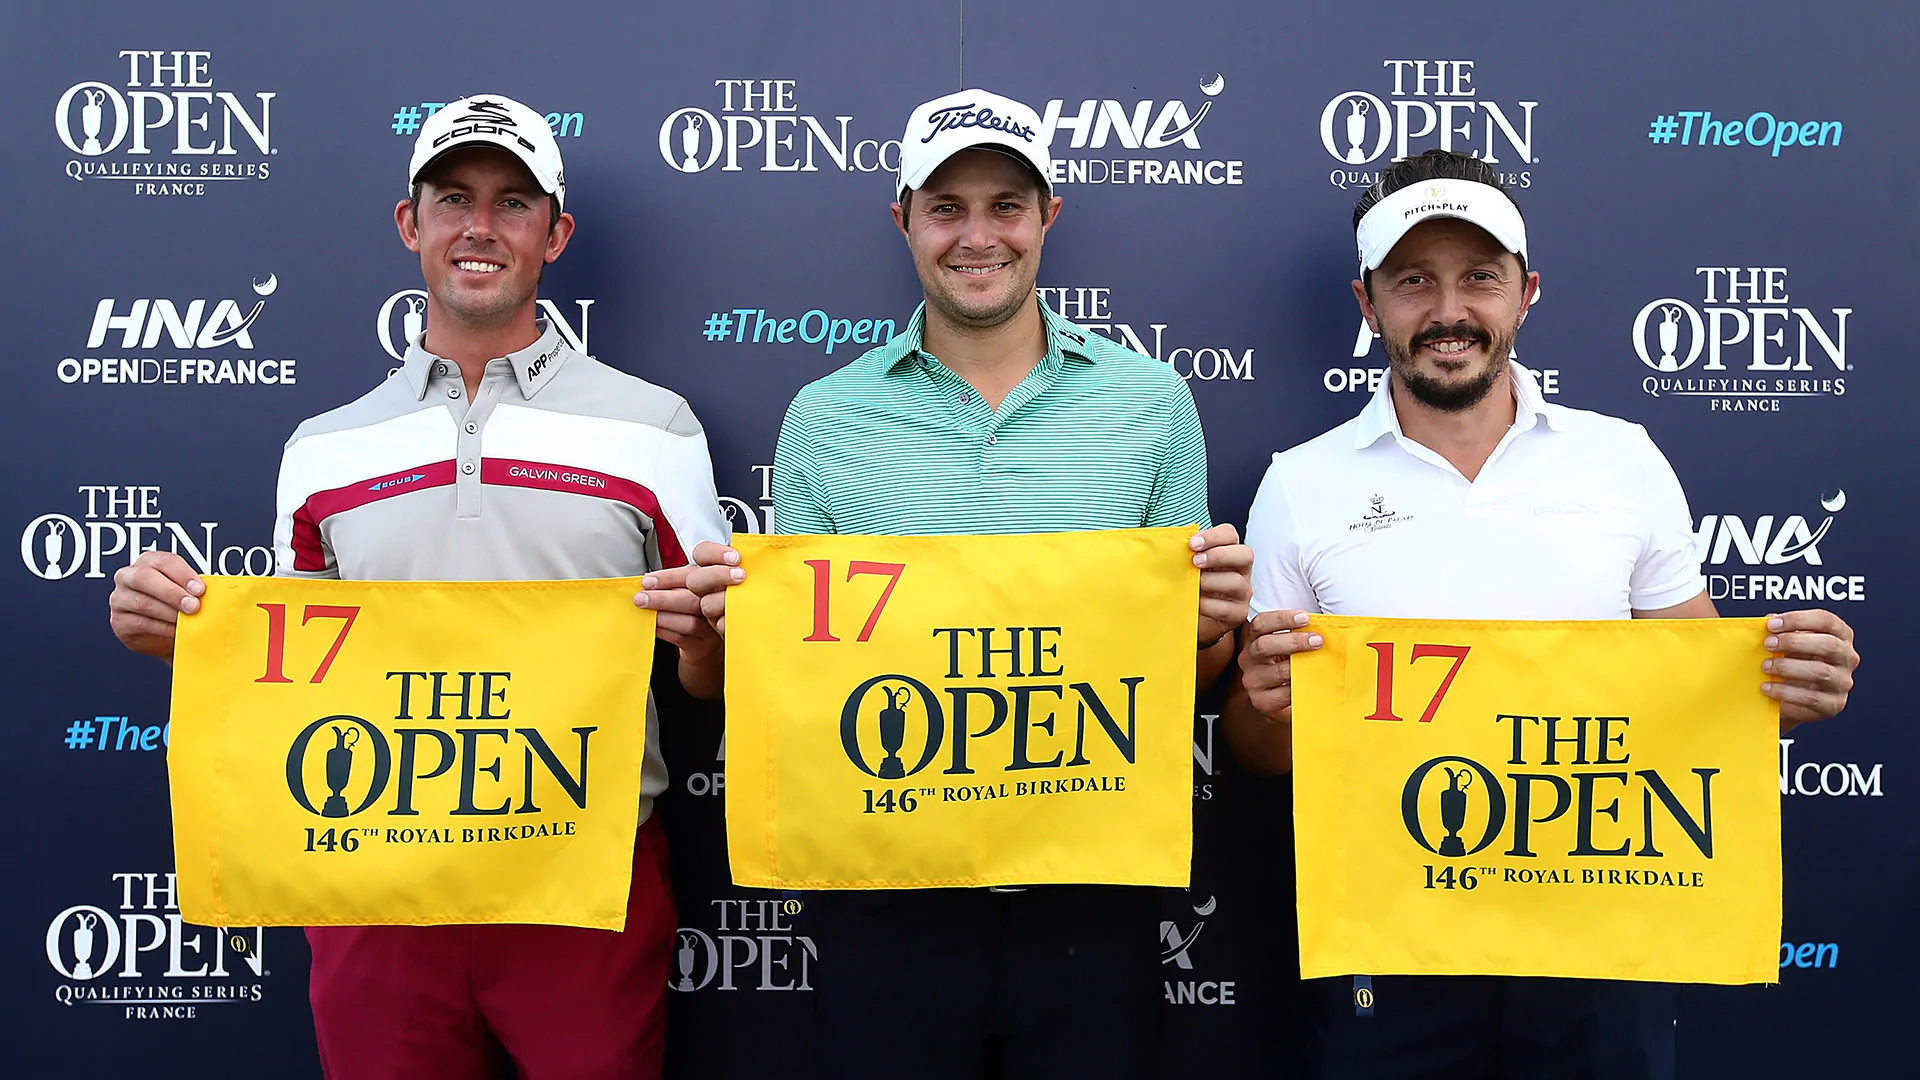 Uihlein among three Open qualifiers at French Open